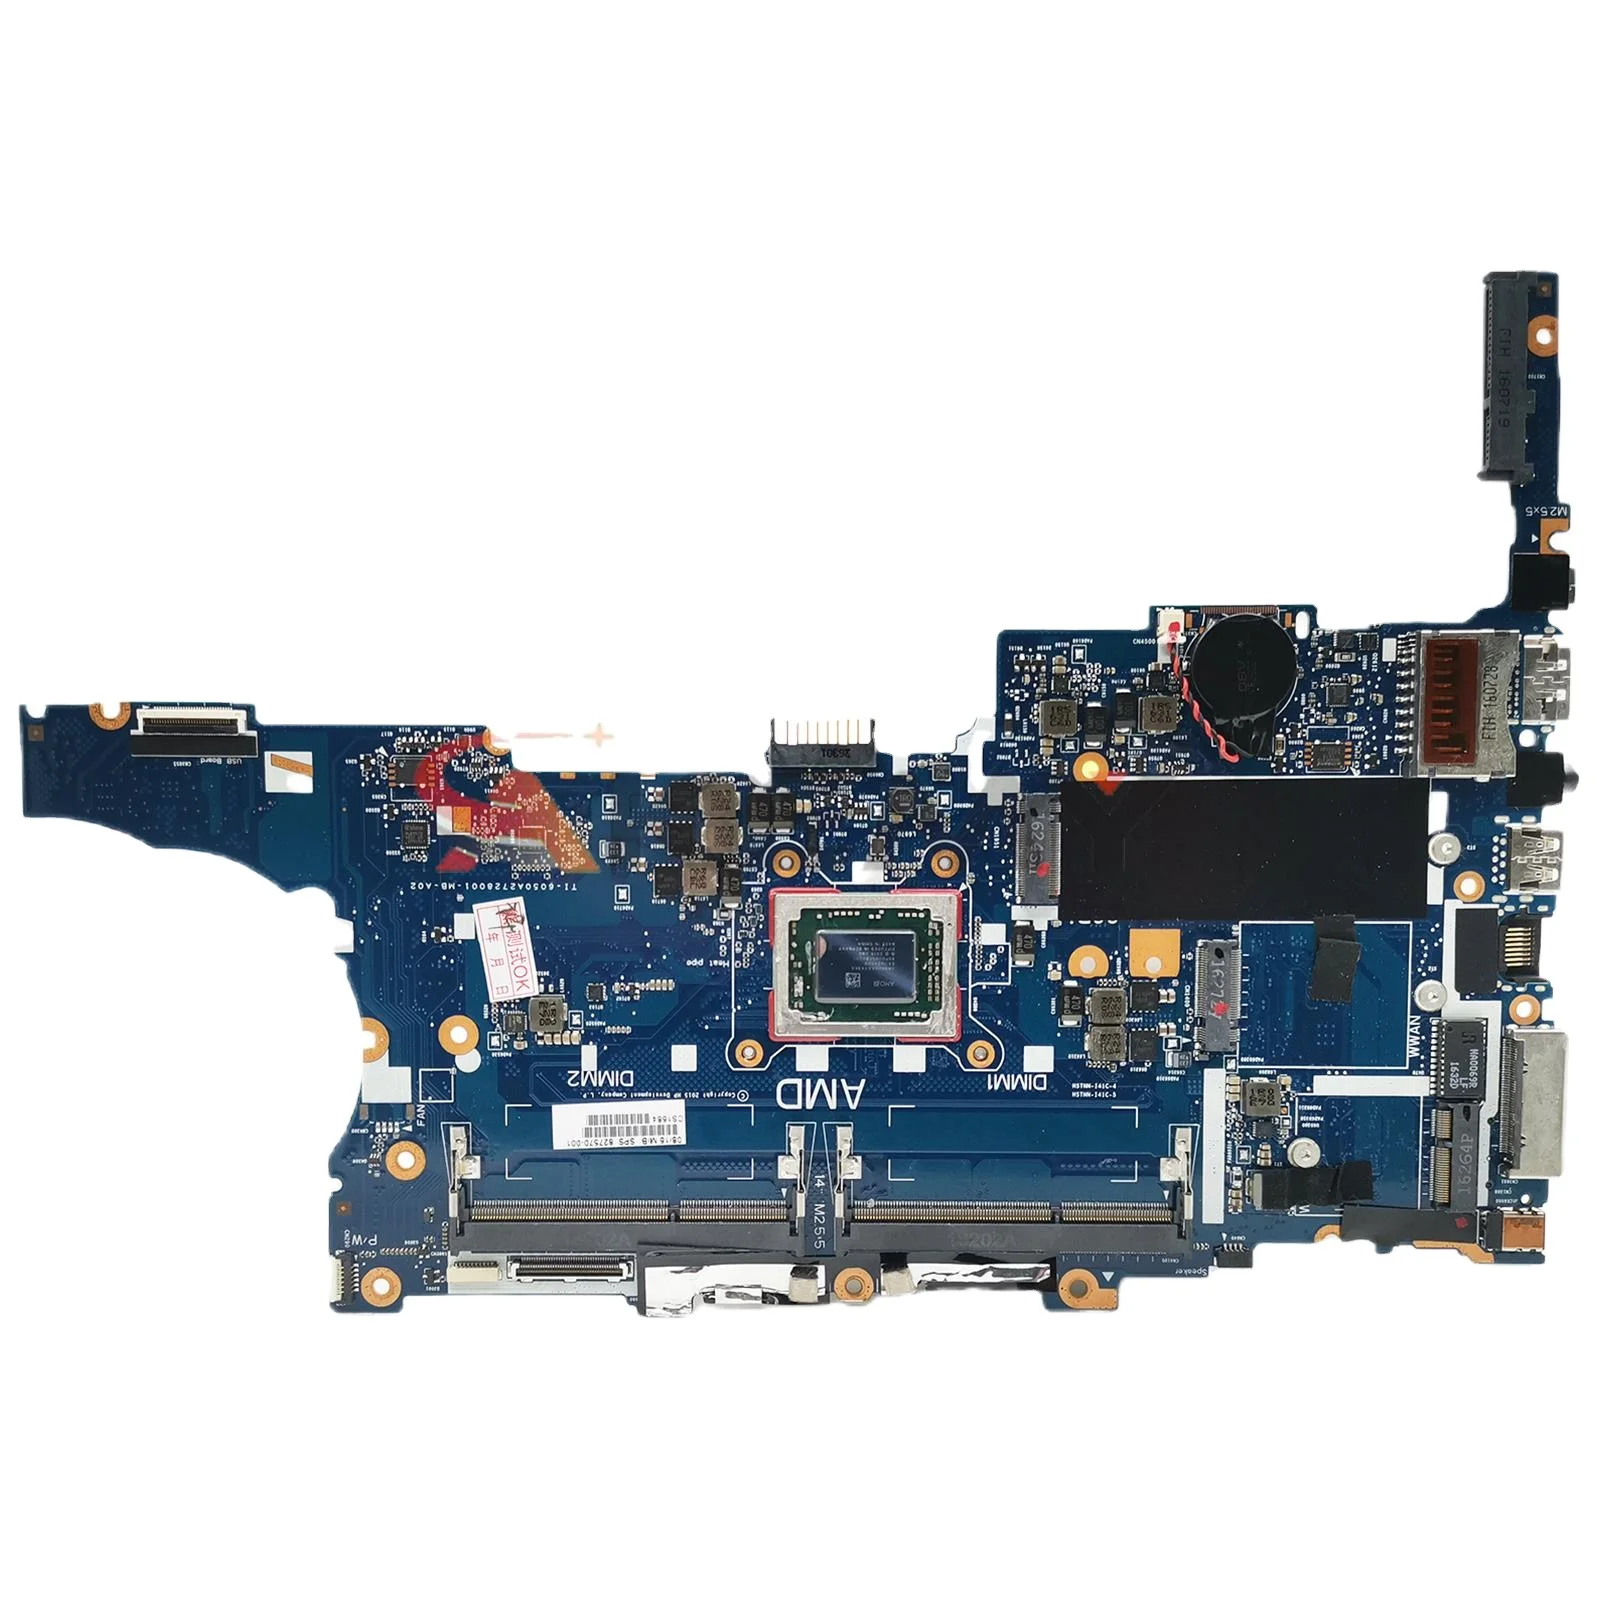 

For HP Elitebook 745 G3 755 G3 Laptop Motherboard Mainboard 6050A2728001 Motherboard DDR3 with A8 A10 A12 AMD CPU